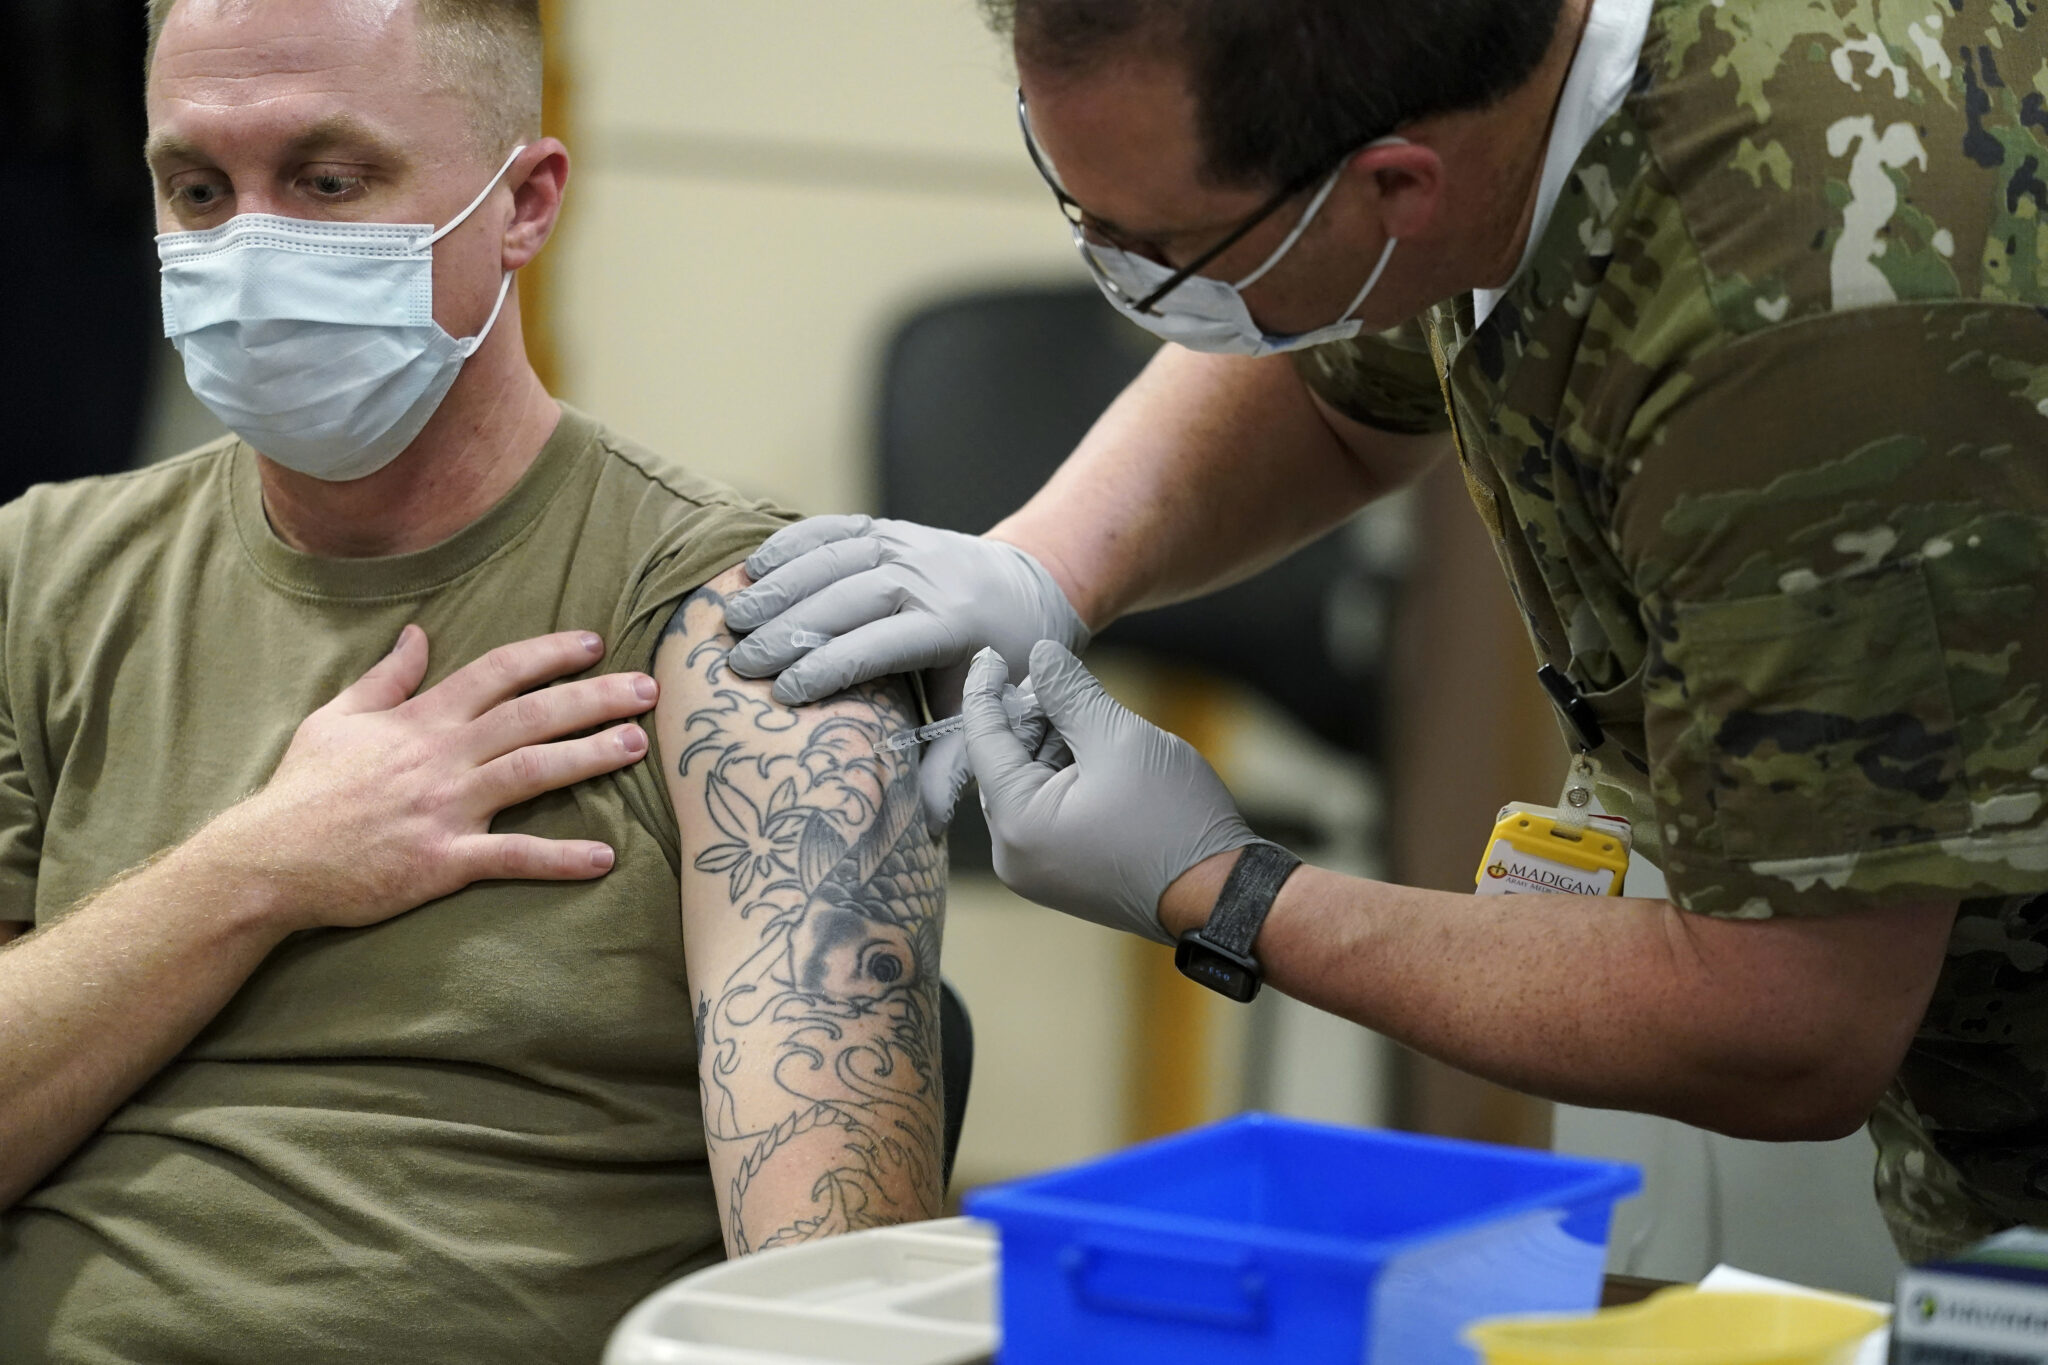 FILE - Staff Sgt. Travis Snyder, left, receives the first dose of the Pfizer COVID-19 vaccine given at Madigan Army Medical Center at Joint Base Lewis-McChord in Washington state, Dec. 16, 2020, south of Seattle. U.S. military forces around the world will no longer be required to get the COVID-19 vaccine. The mandate was lifted under an $858 billion defense spending bill passed by Congress and signed into law Friday by President Joe Biden. (AP Photo/Ted S. Warren, File)